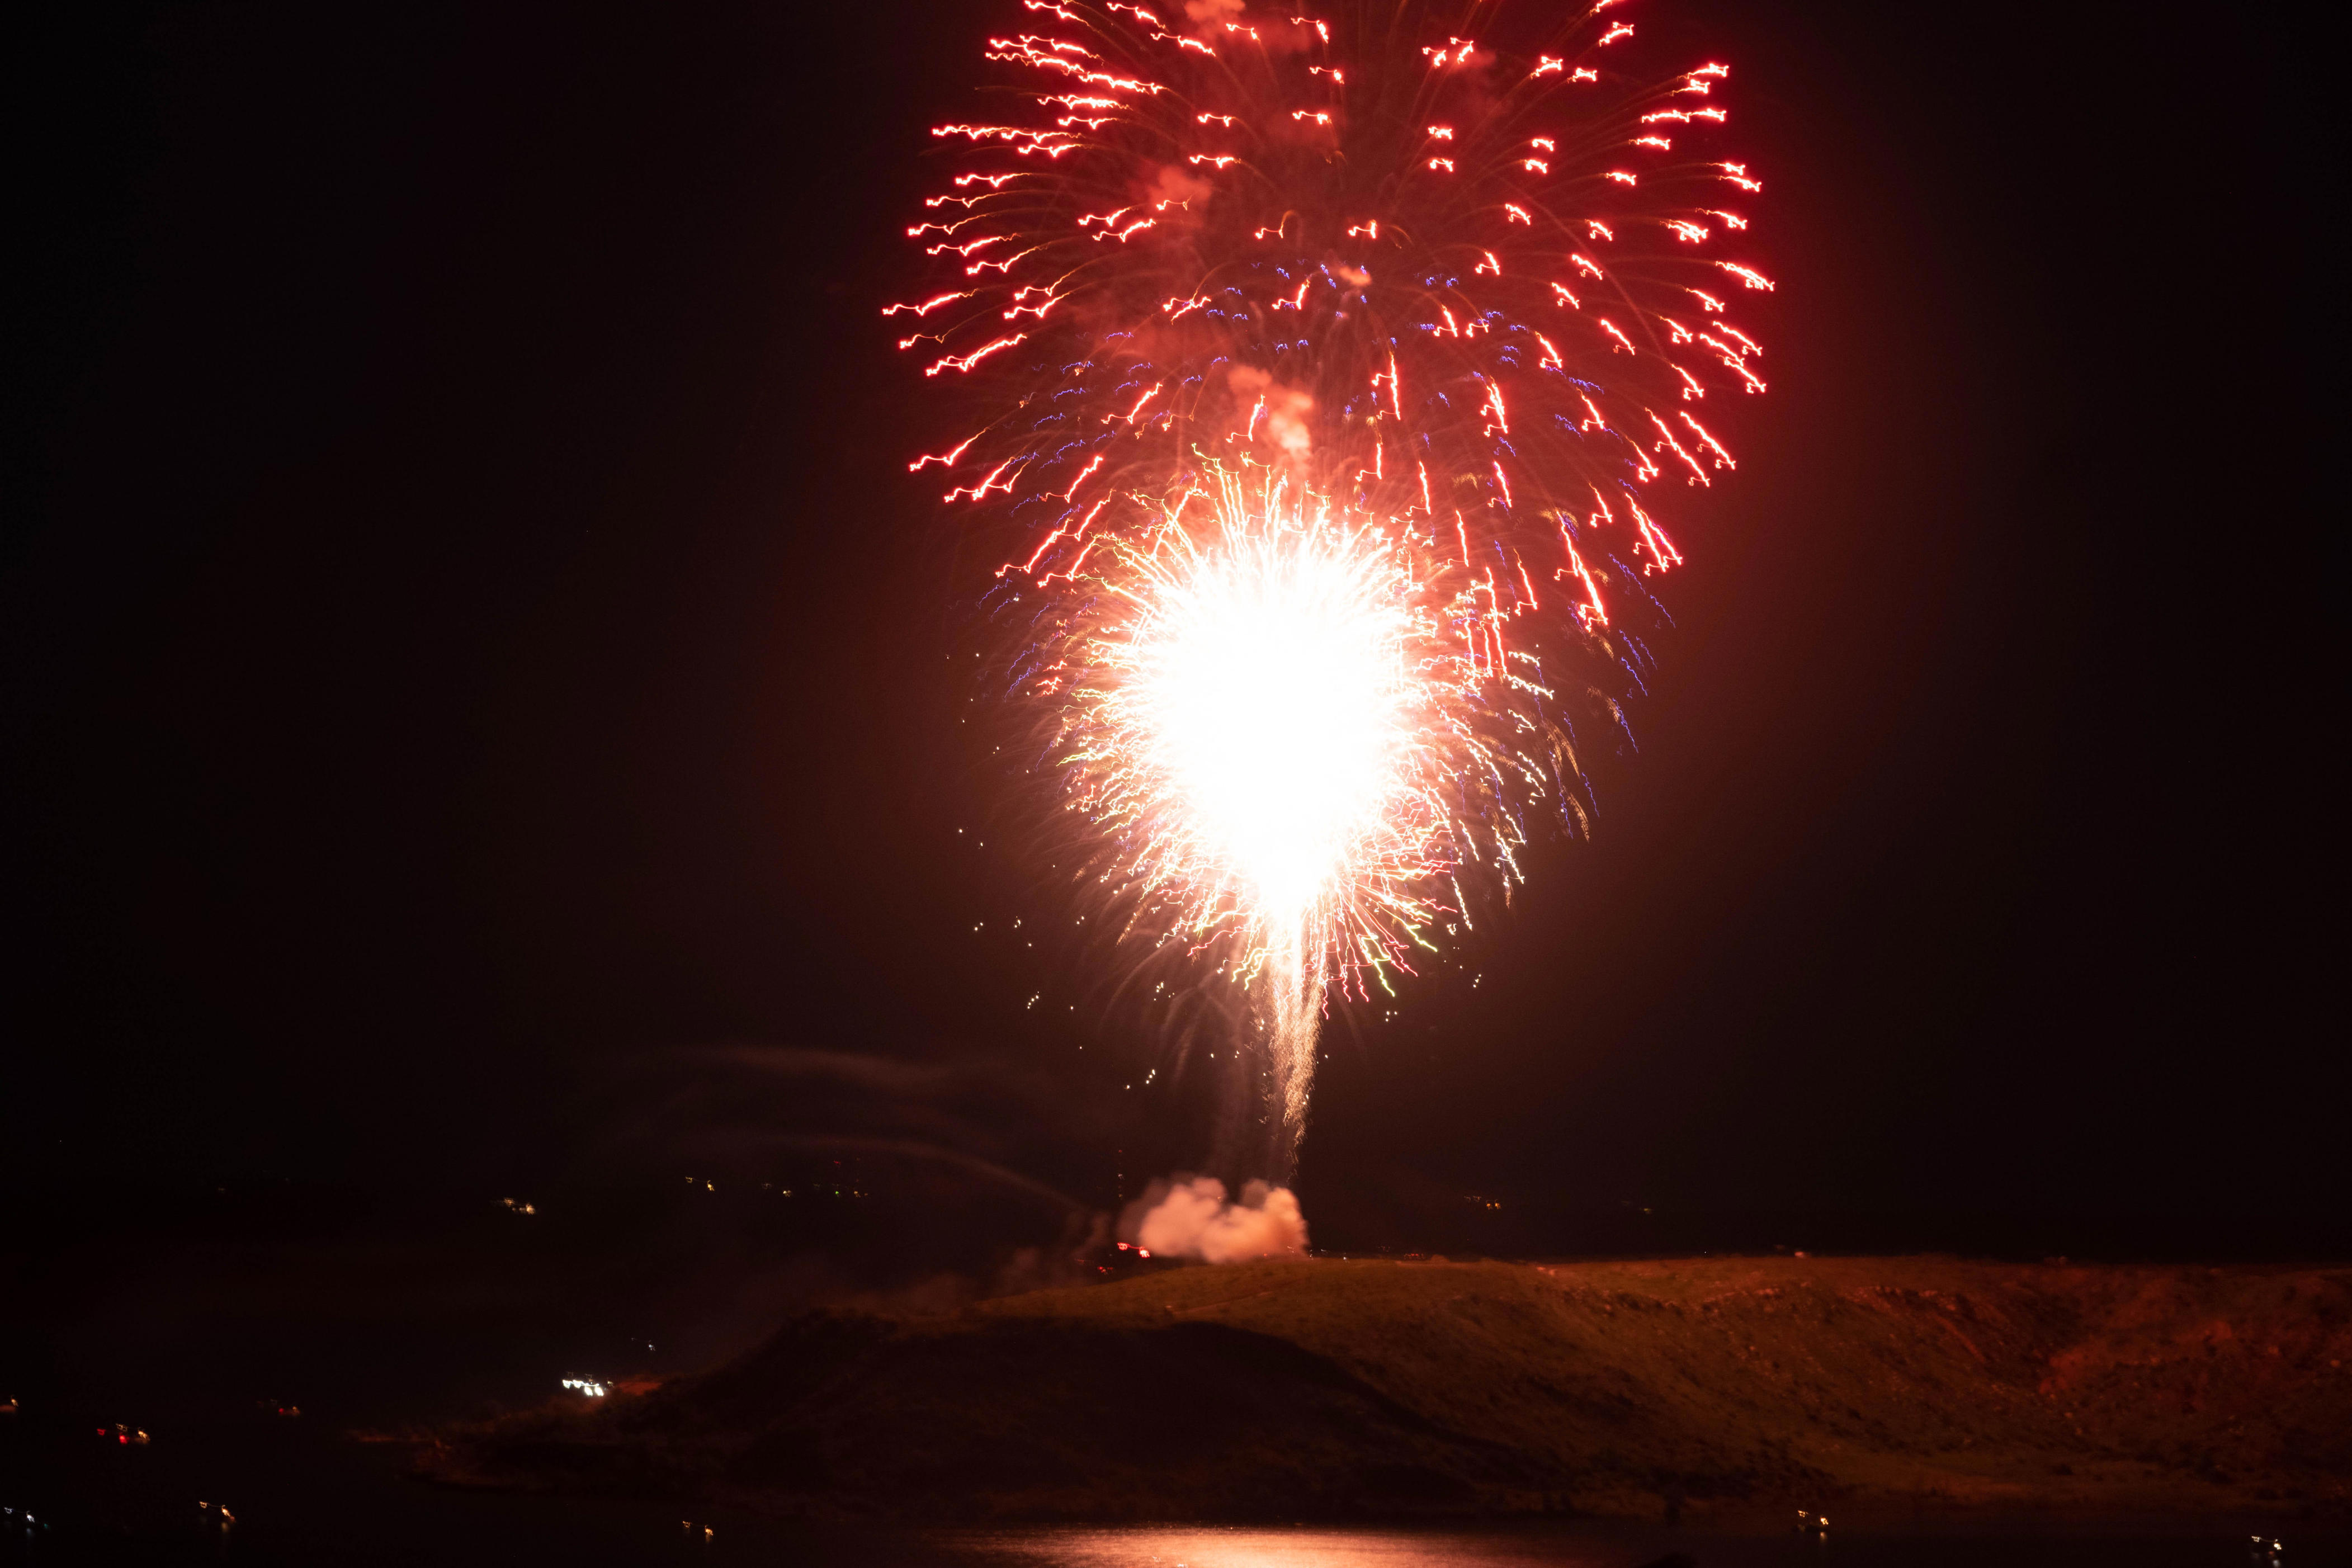 Lake Meredith fireworks delight crowd on Fourth of July weekend